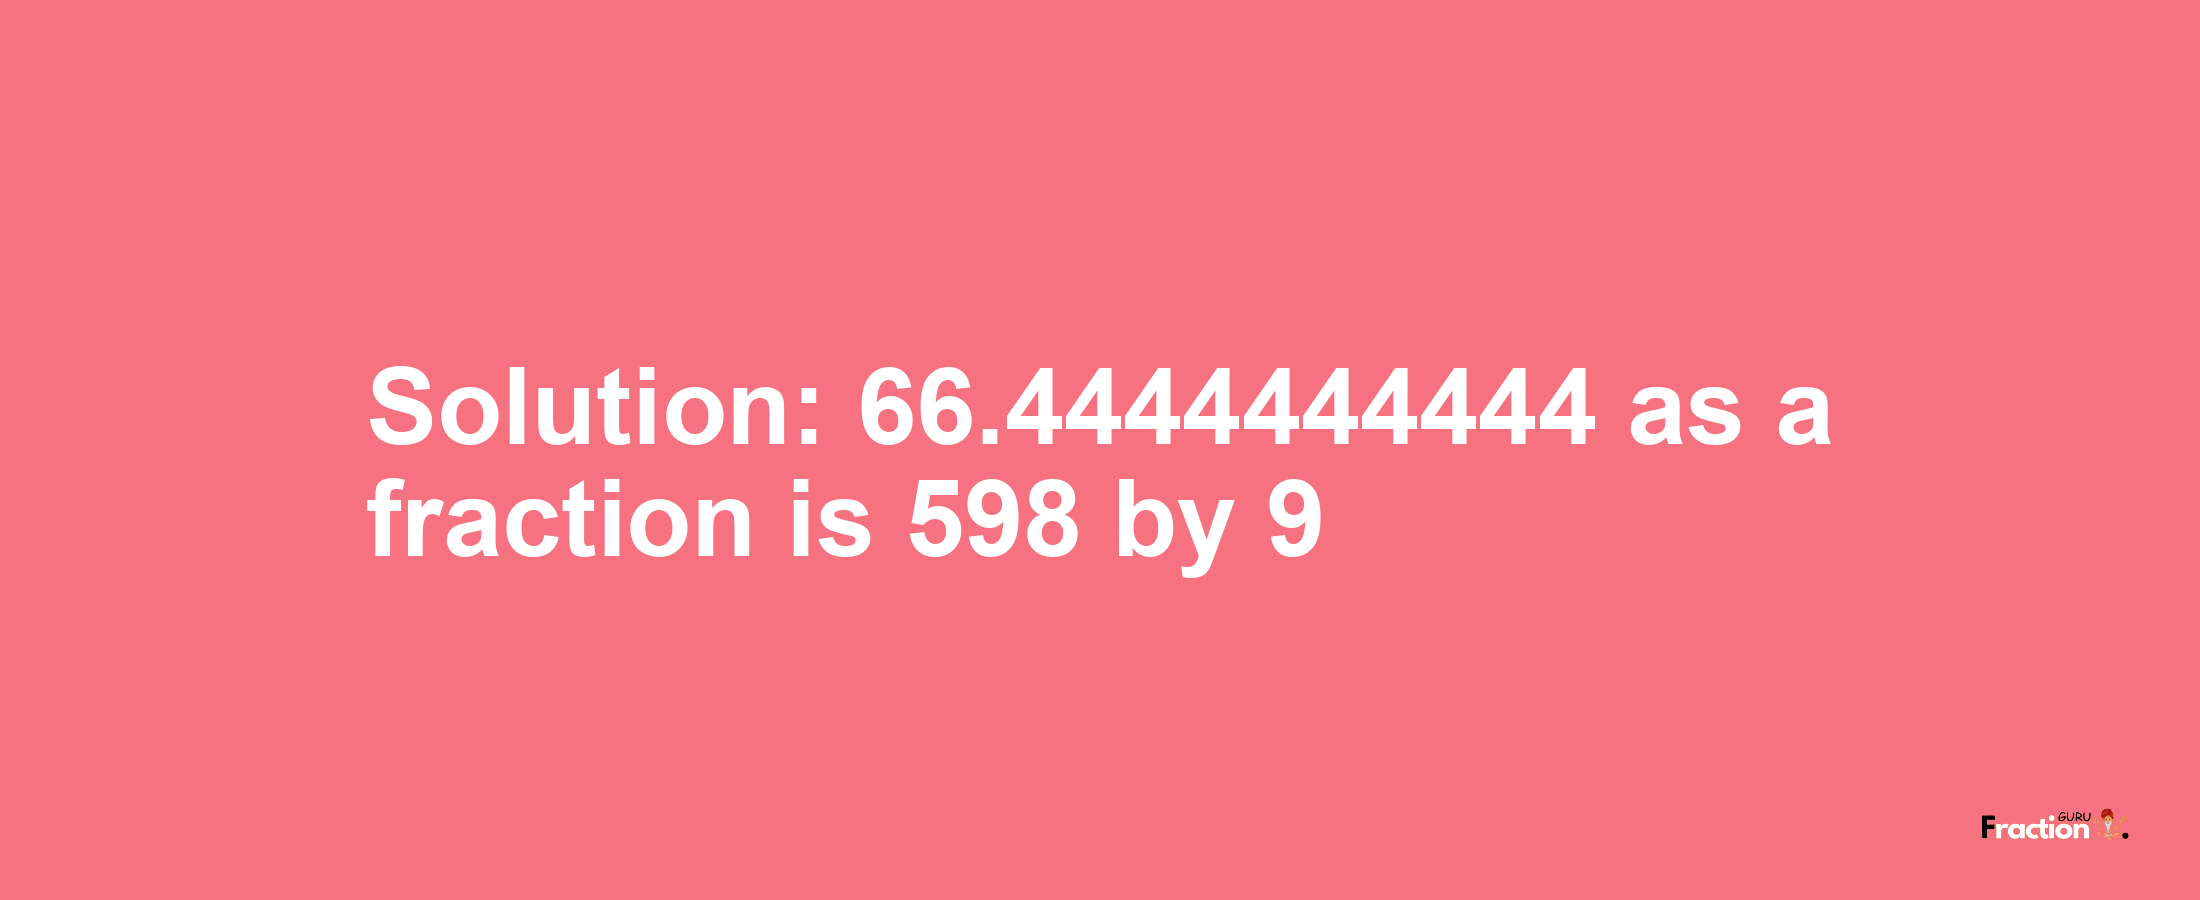 Solution:66.4444444444 as a fraction is 598/9